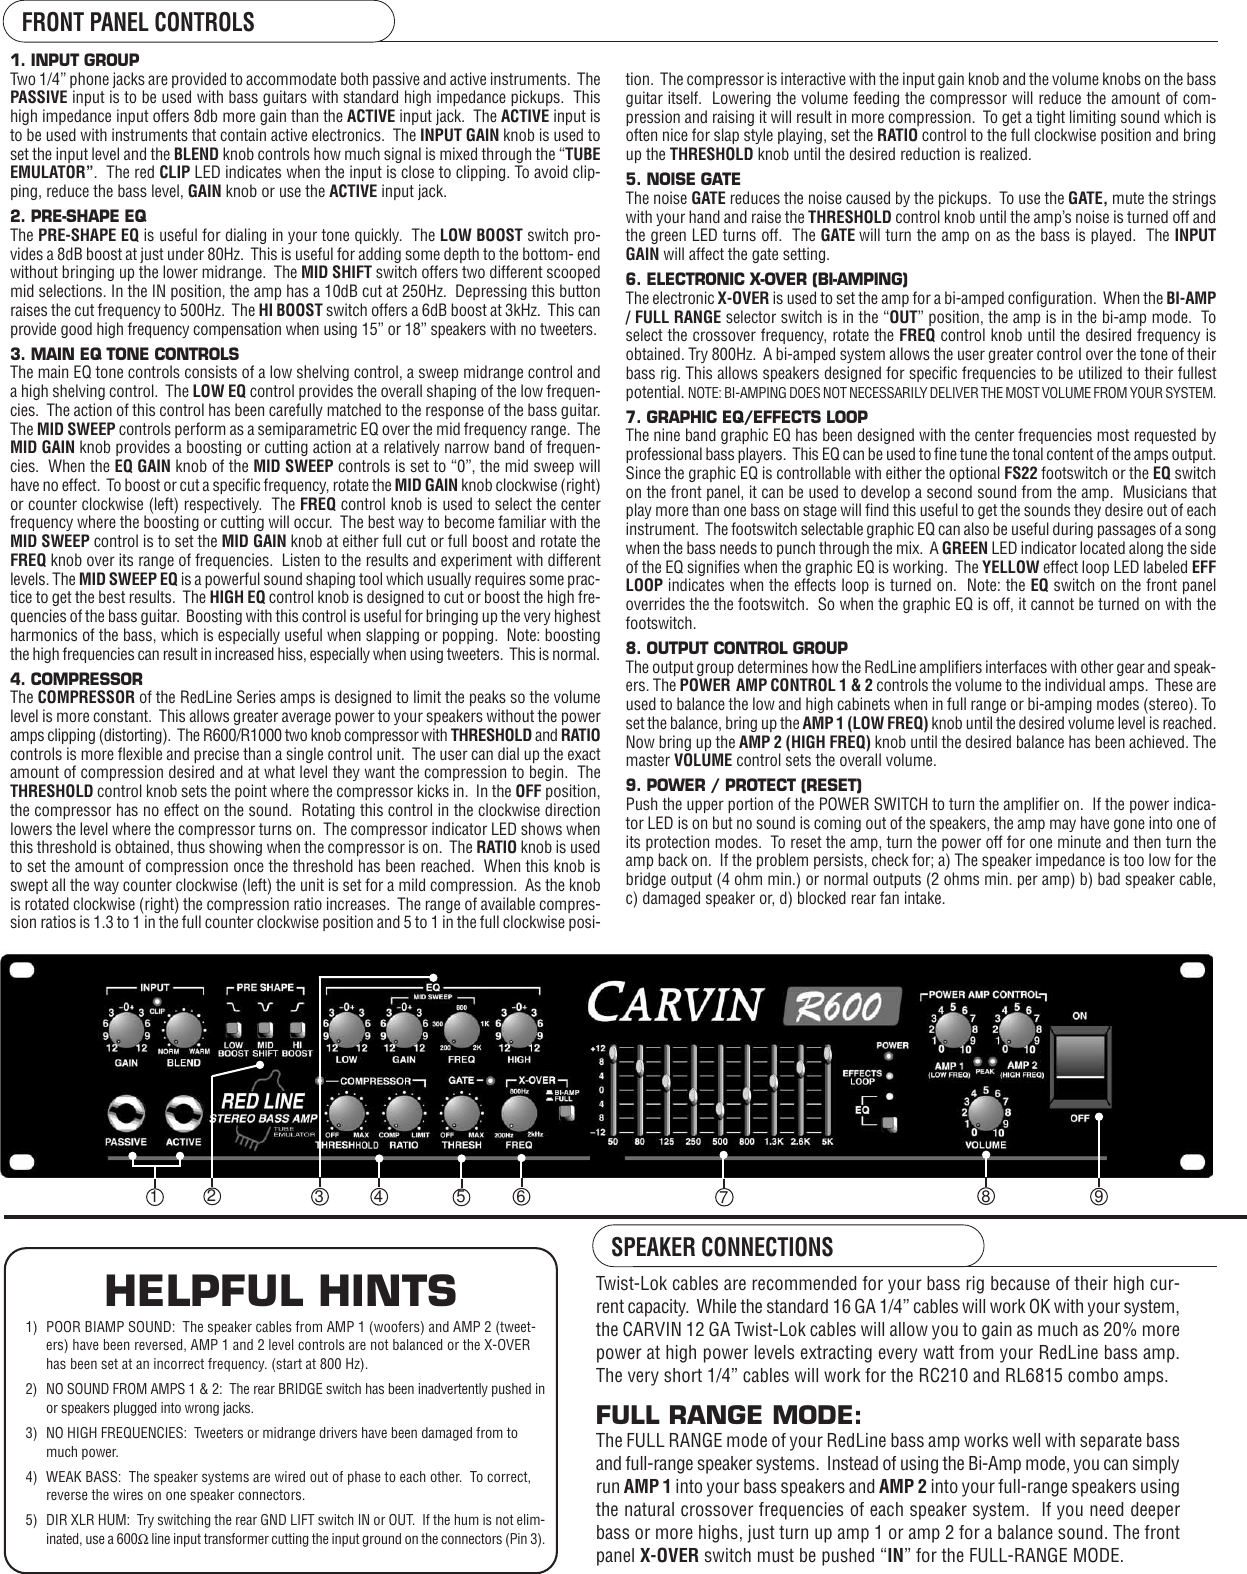 Page 2 of 4 - Carvin Carvin-R600-Series-Iii-Owners-Manual R600_R1000-08/01-web.qx